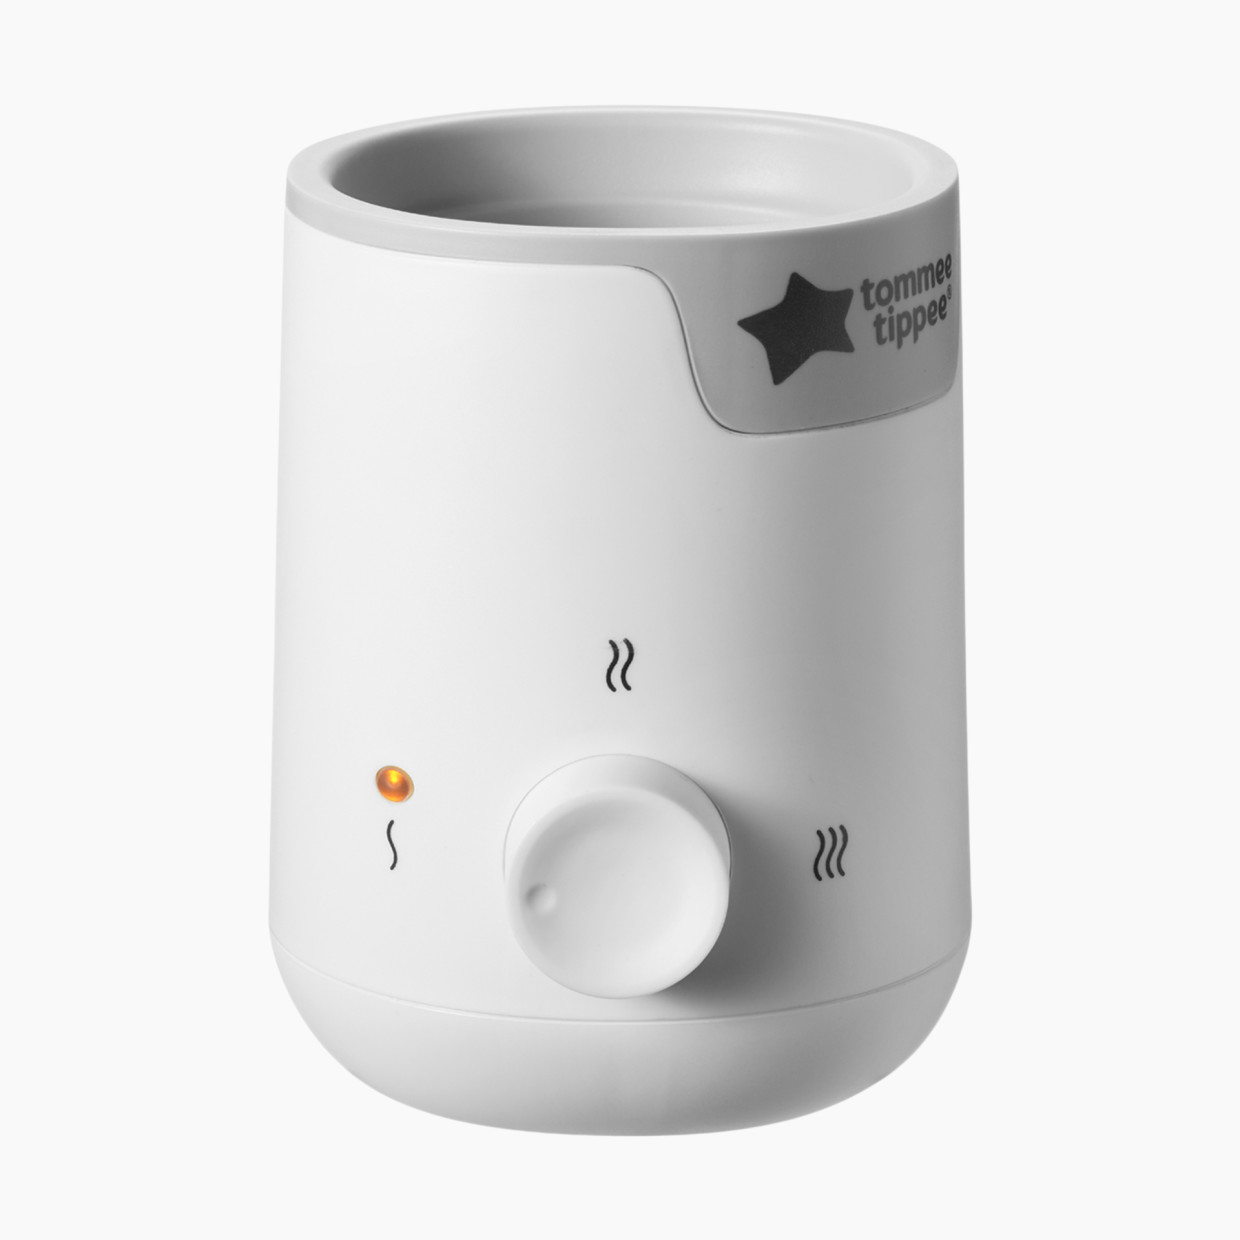 Tommee Tippee Easi-Warm Electric Bottle And Food Warmer.